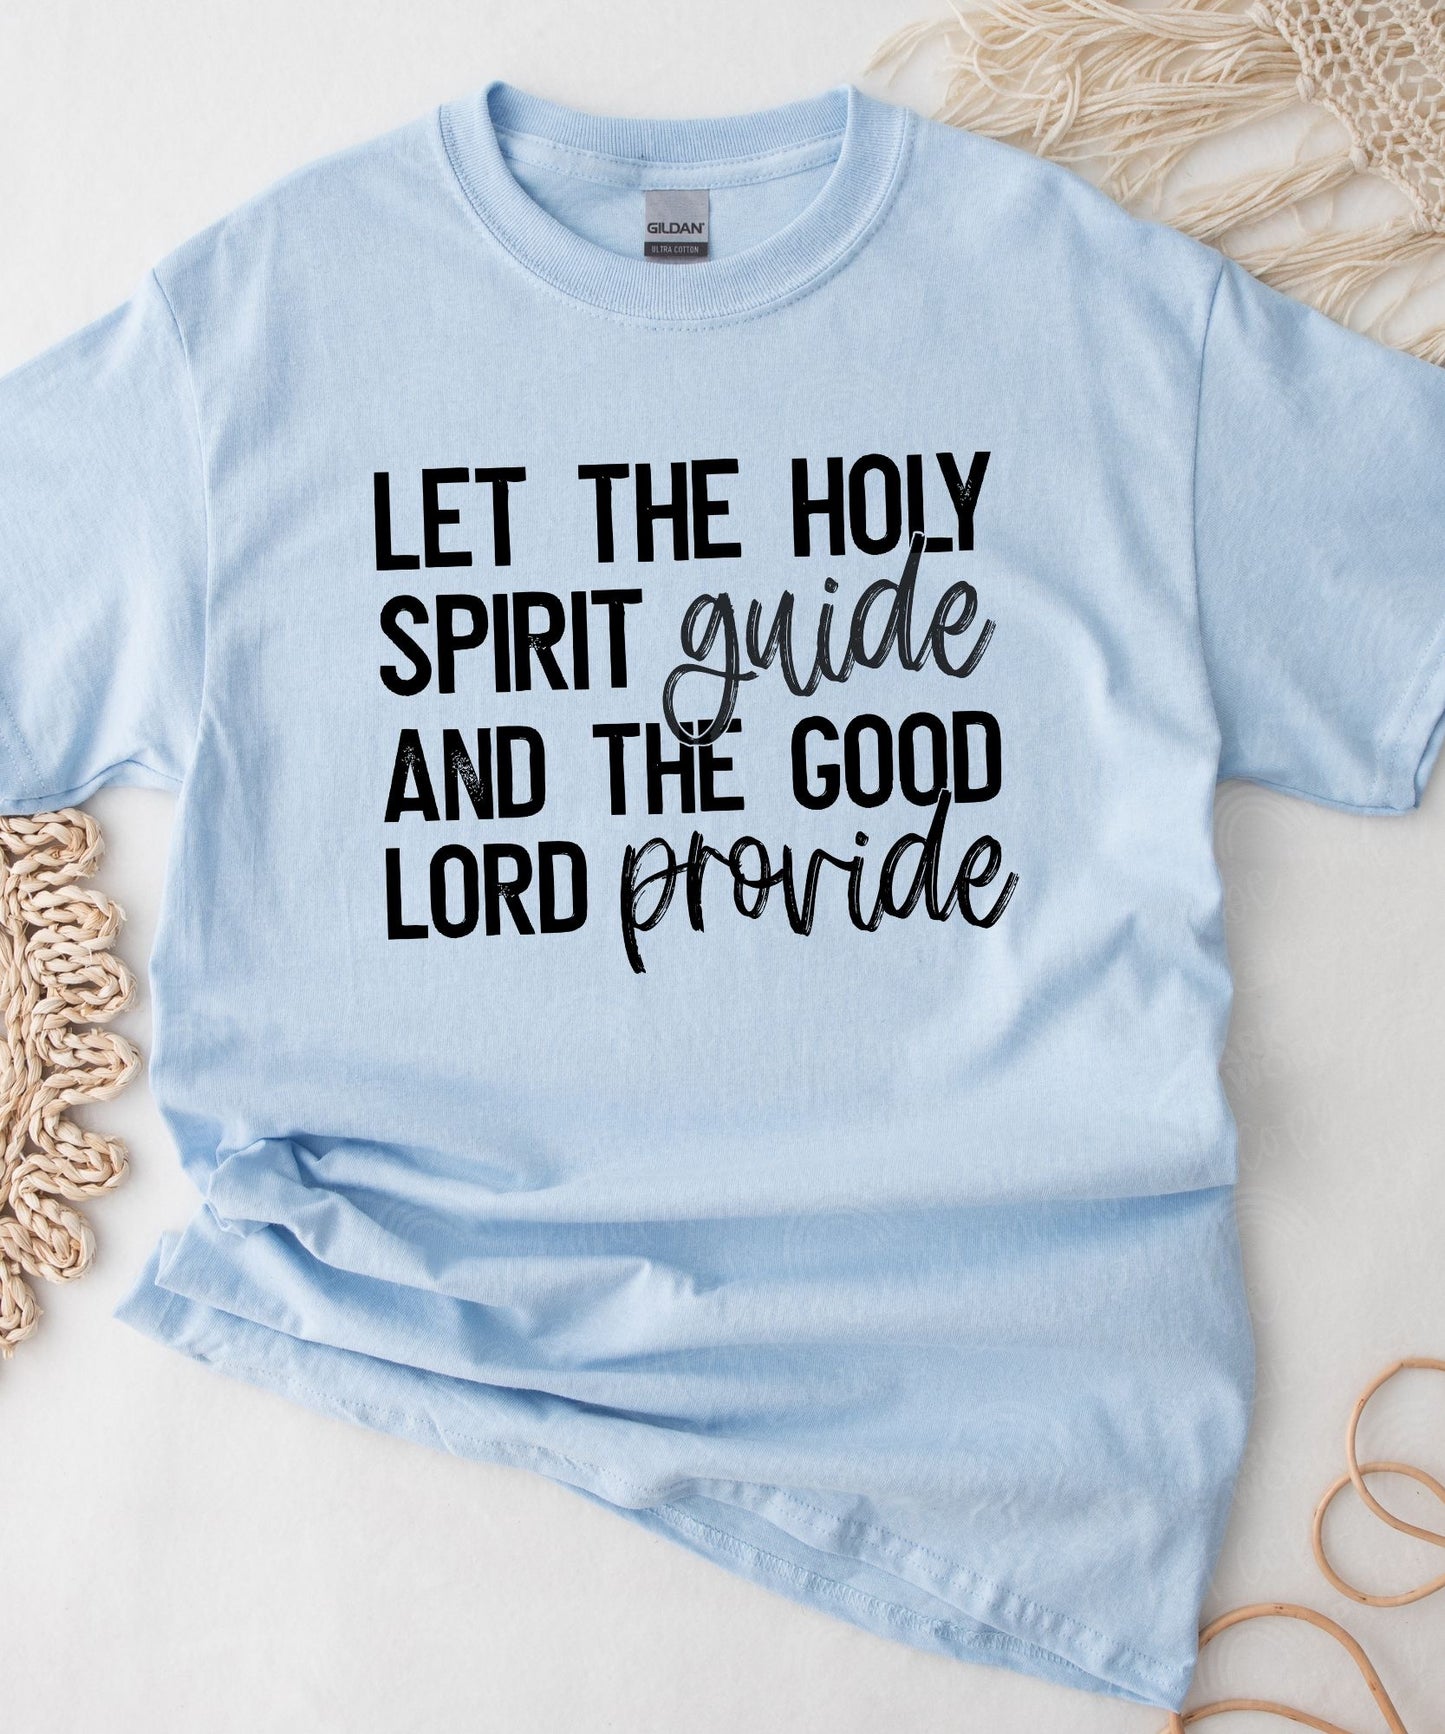 RTS - Let the Holy Spirit guide - ADULT SCREEN PRINT TRANSFER**